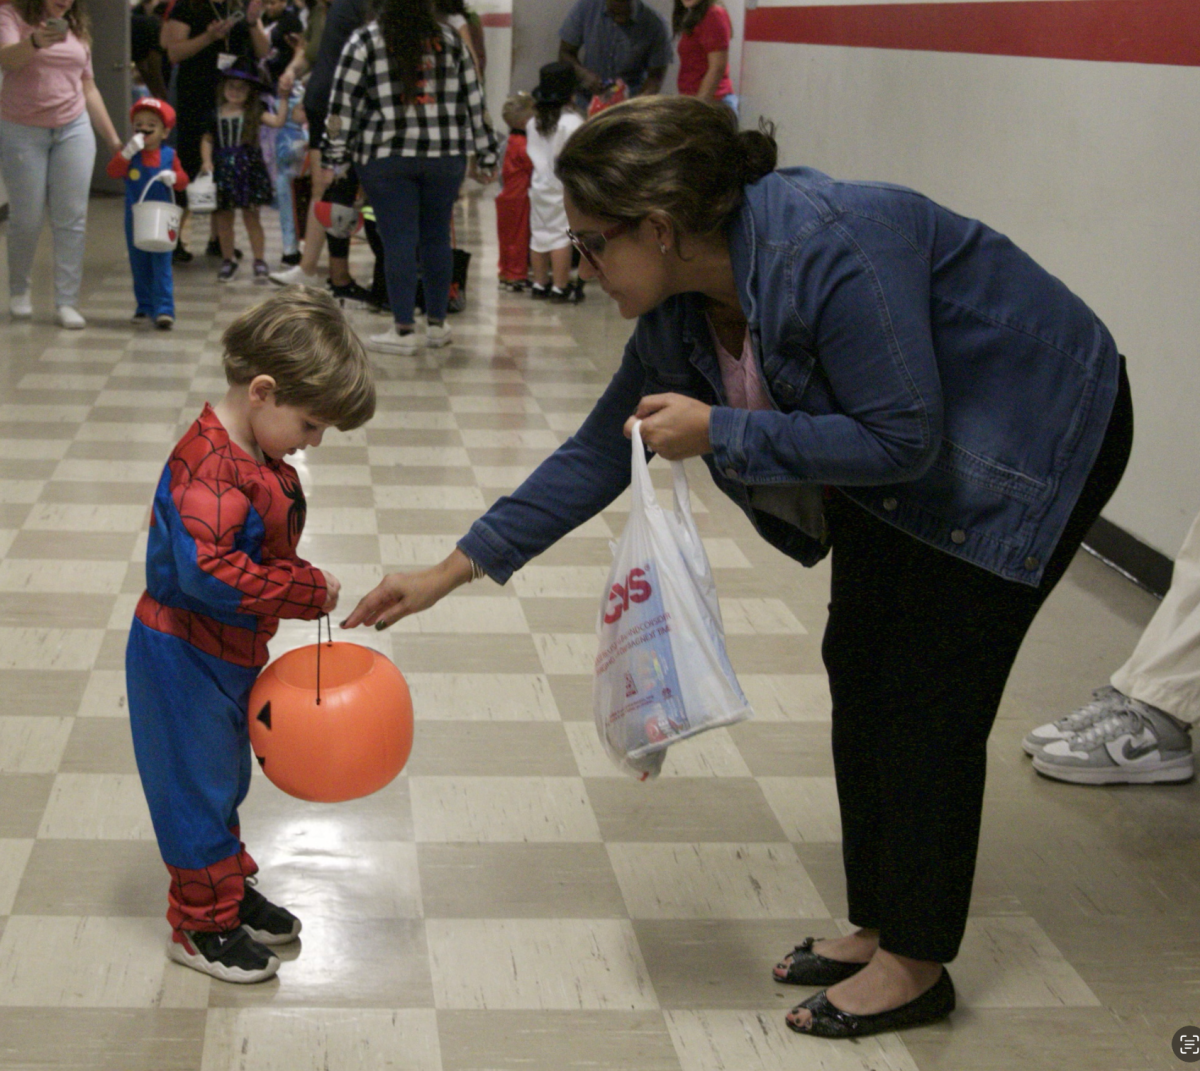 Handing down candy to a Little Cavalier dressed up as Spider-Man, Ms. Vazquezbello volunteered in making the children smiles.